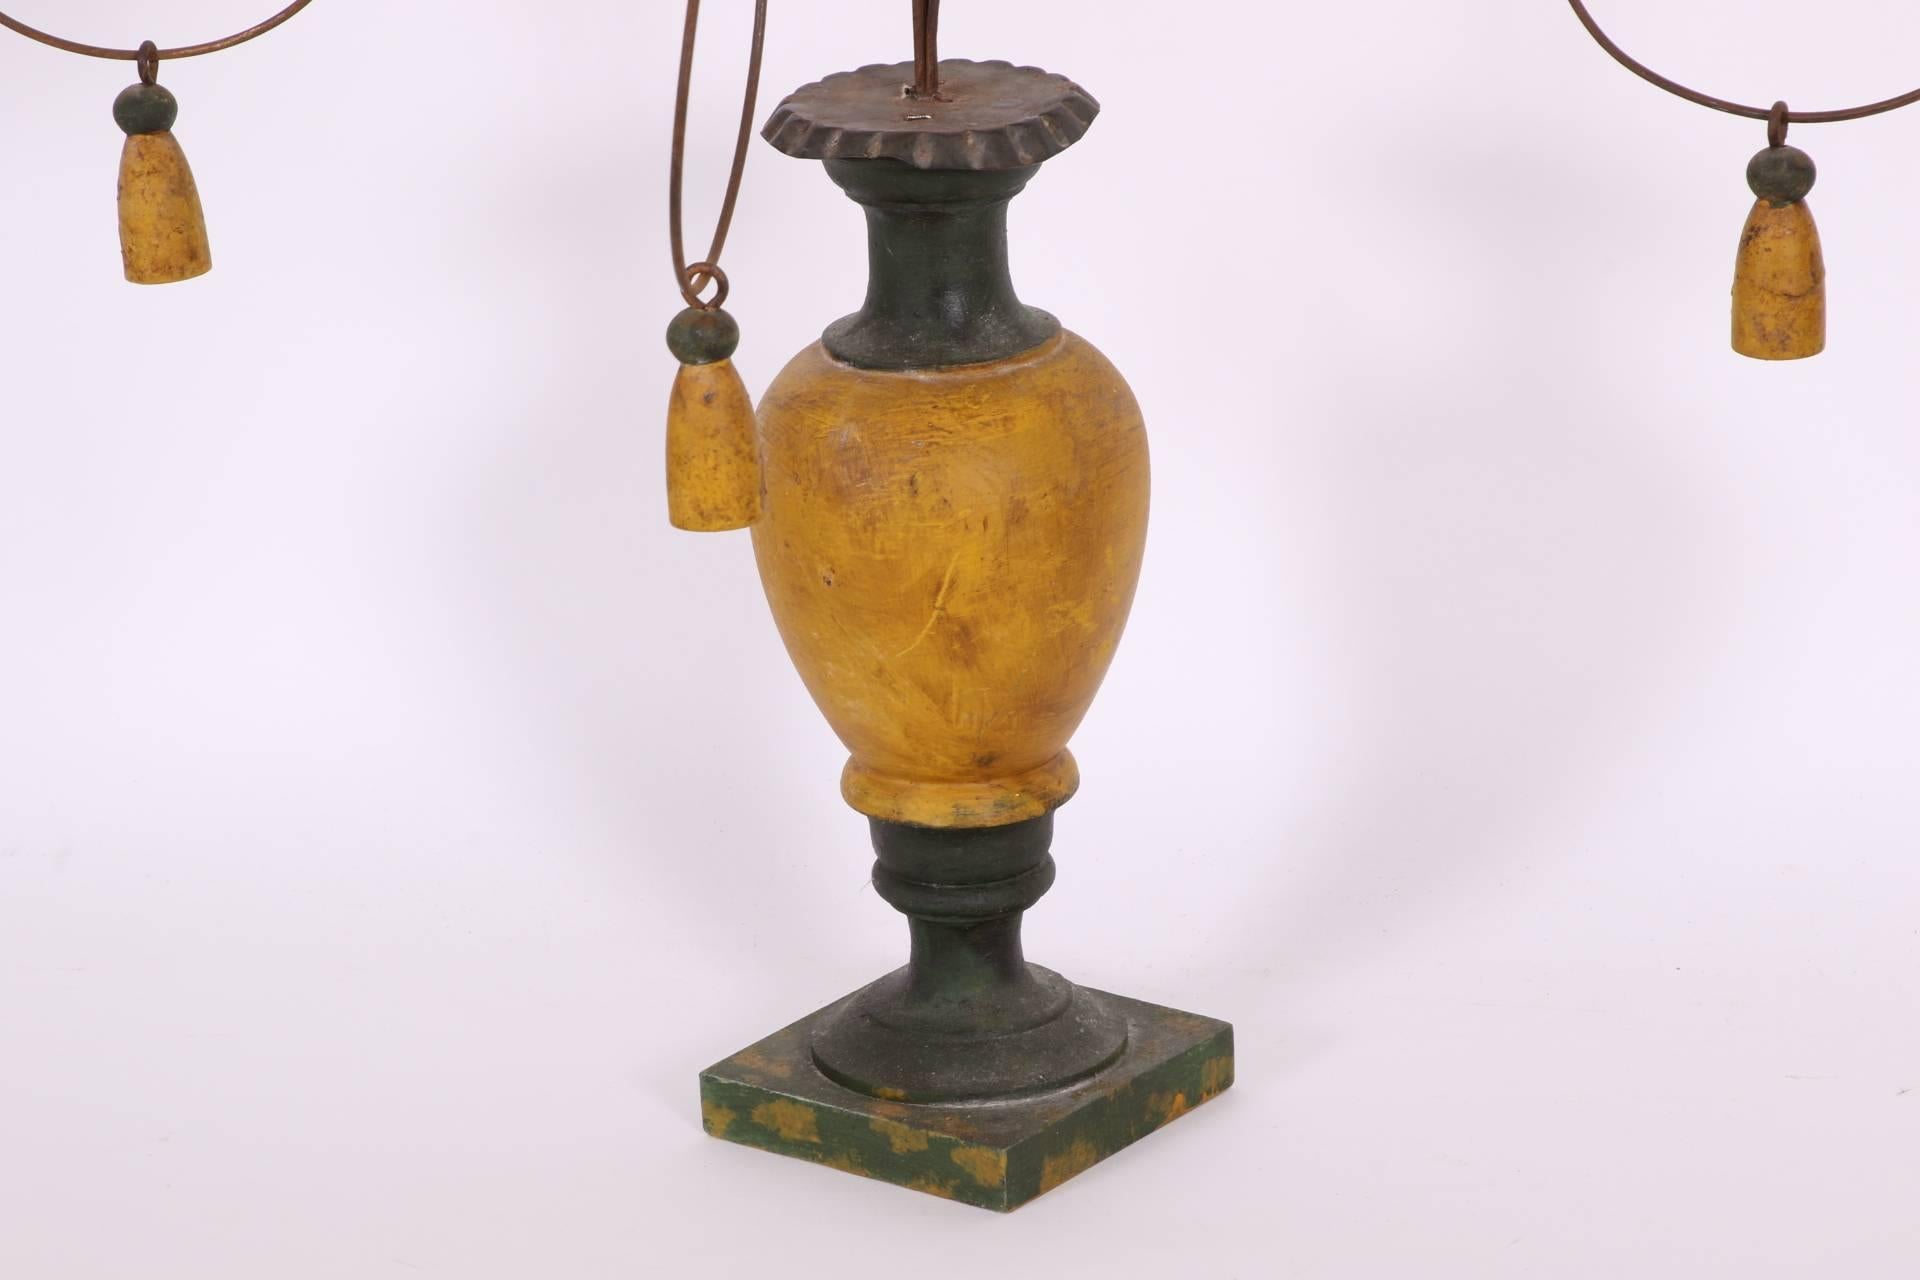 Four-light, with urn form supports in old green and mustard yellow paint on faux marble bases. Three scrolled iron wire arms and one vertical one with green and yellow ‘candles’ and ruffled iron bobeches. Painted tassel form pendants on each arm. In